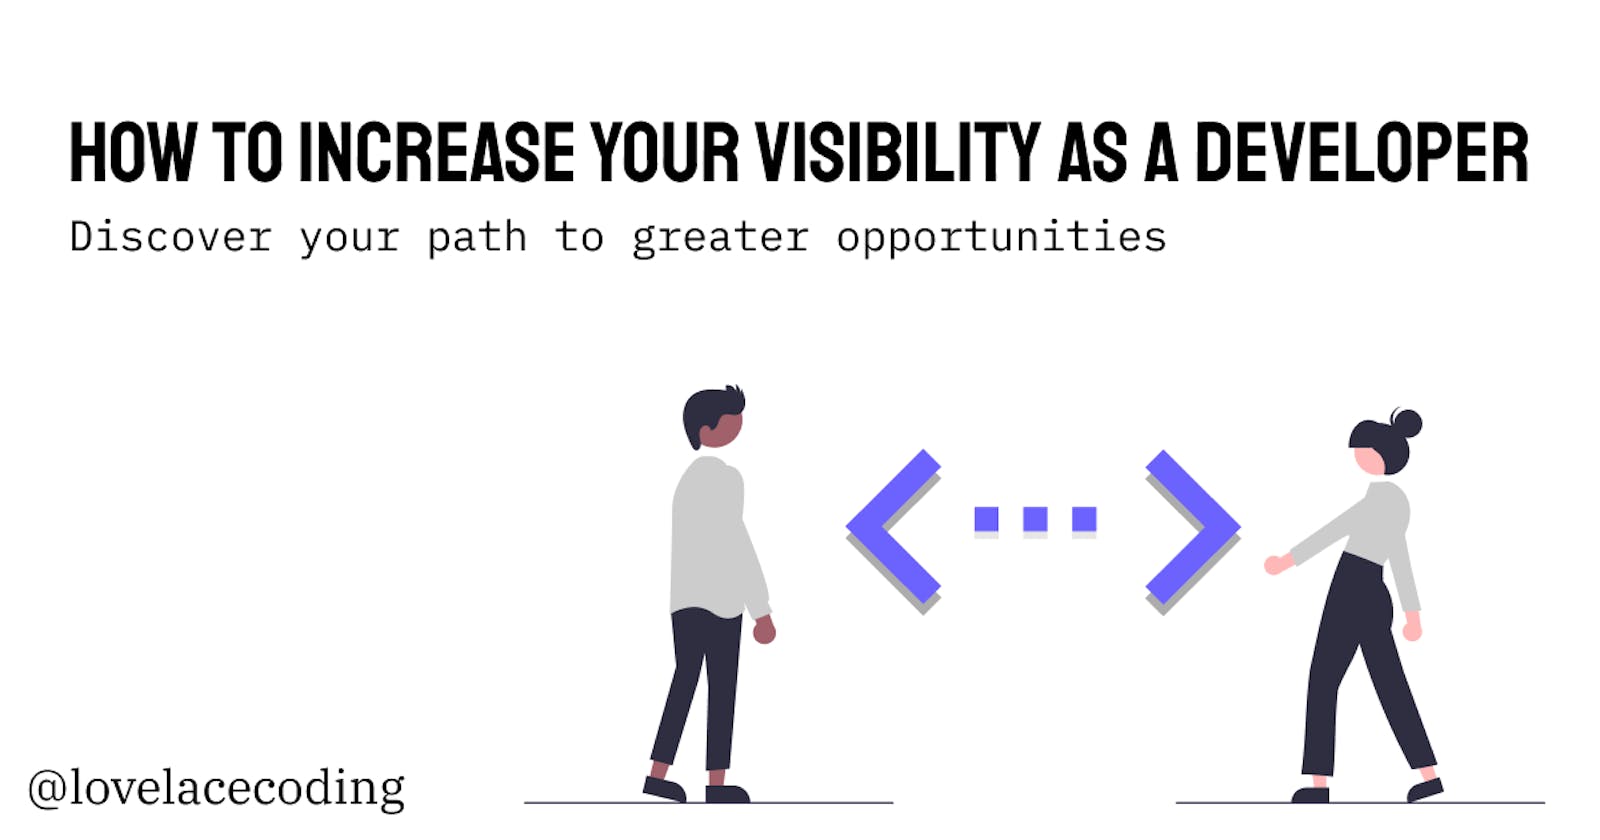 How To Increase Your Visibility as a Developer